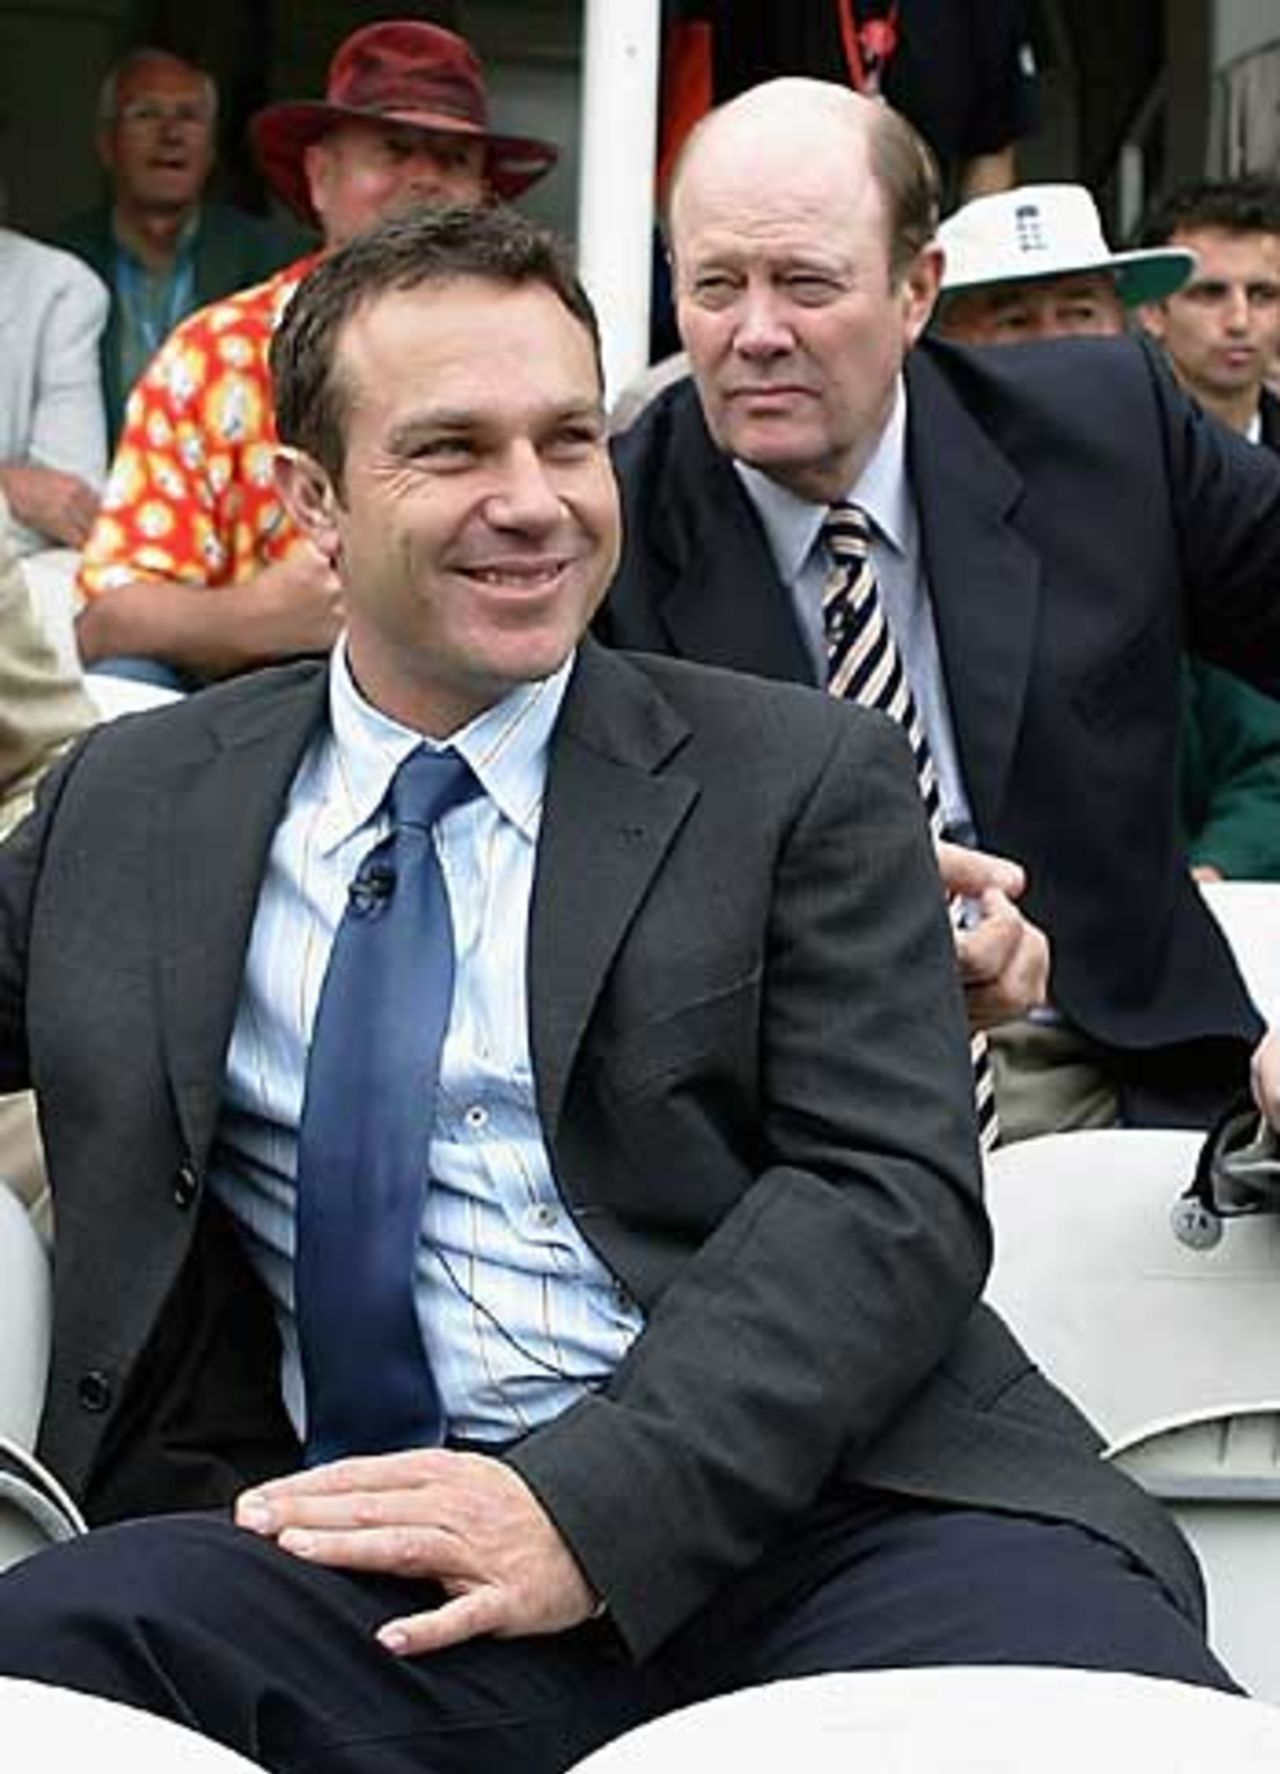 Michael Slater chats with his fellow commentators, England v Australia, The Oval, September 12, 2005